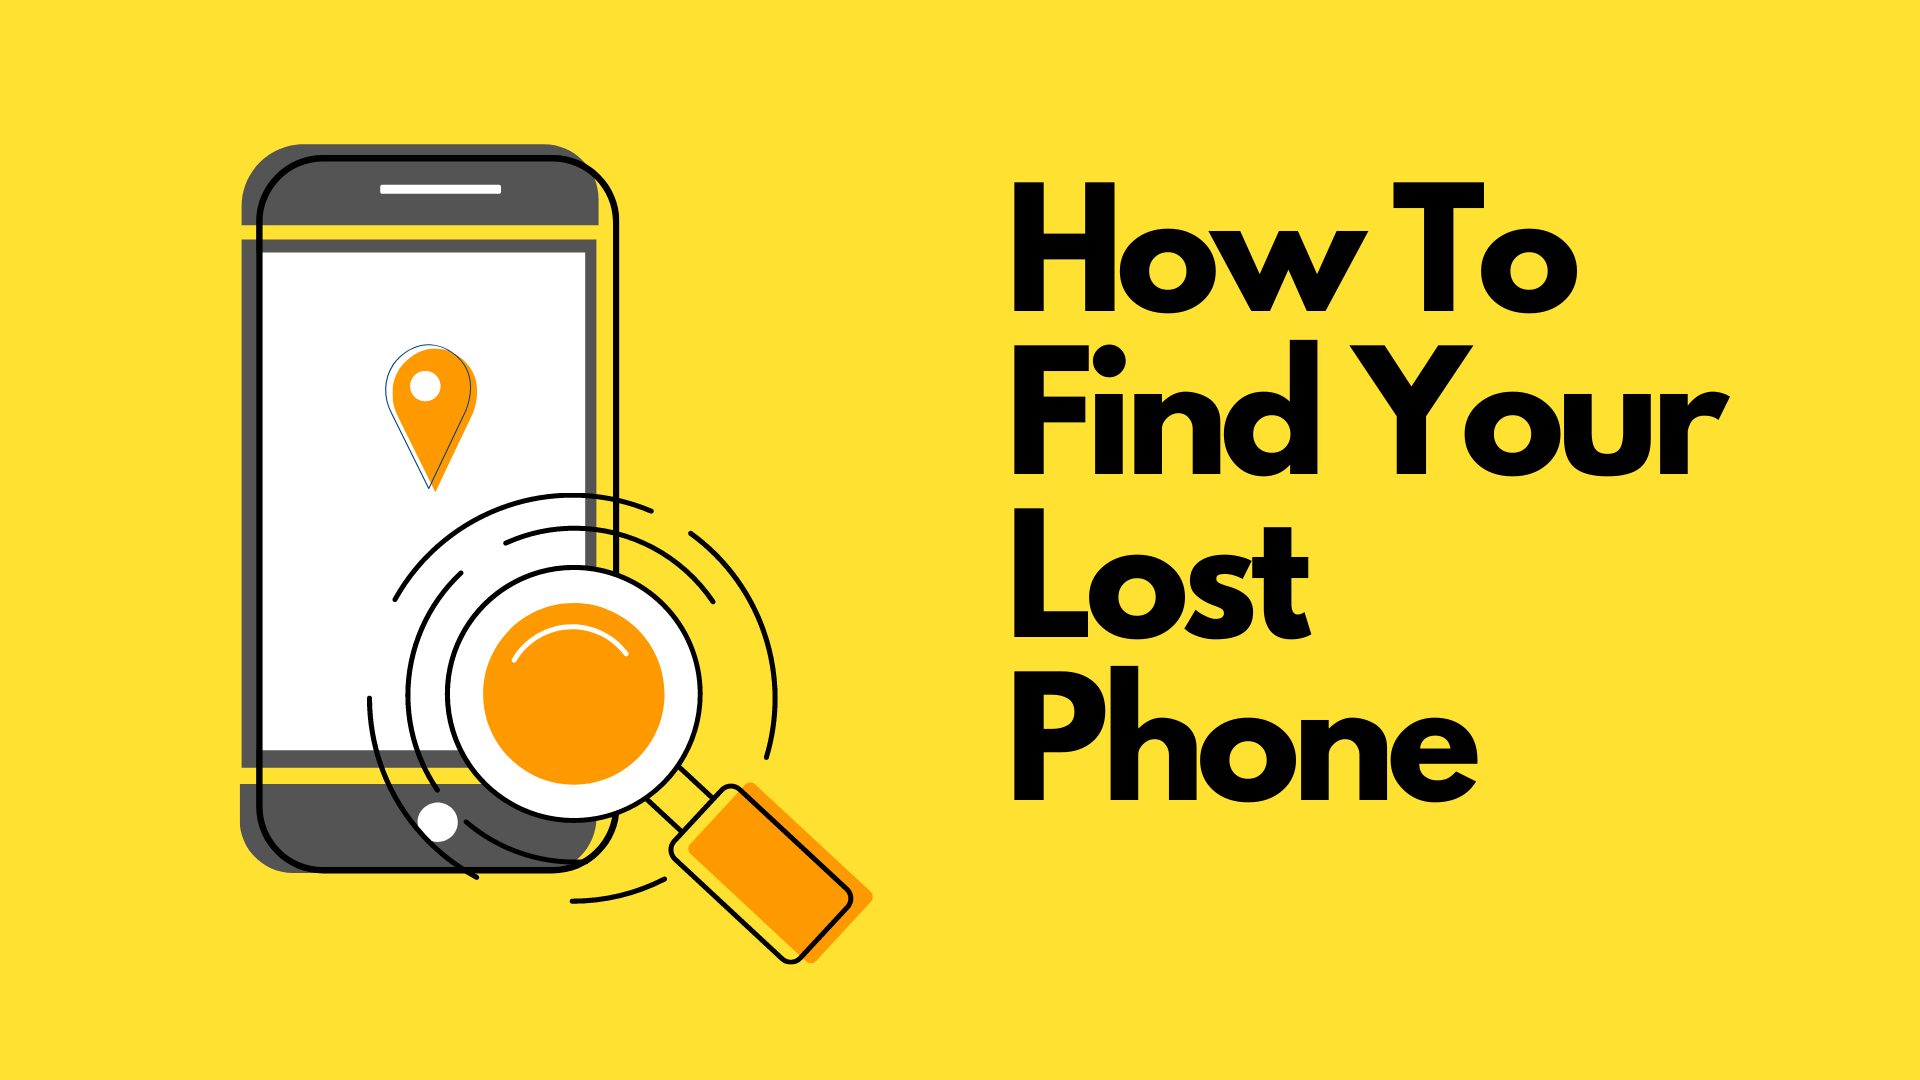 How To Find Your Lost Phone